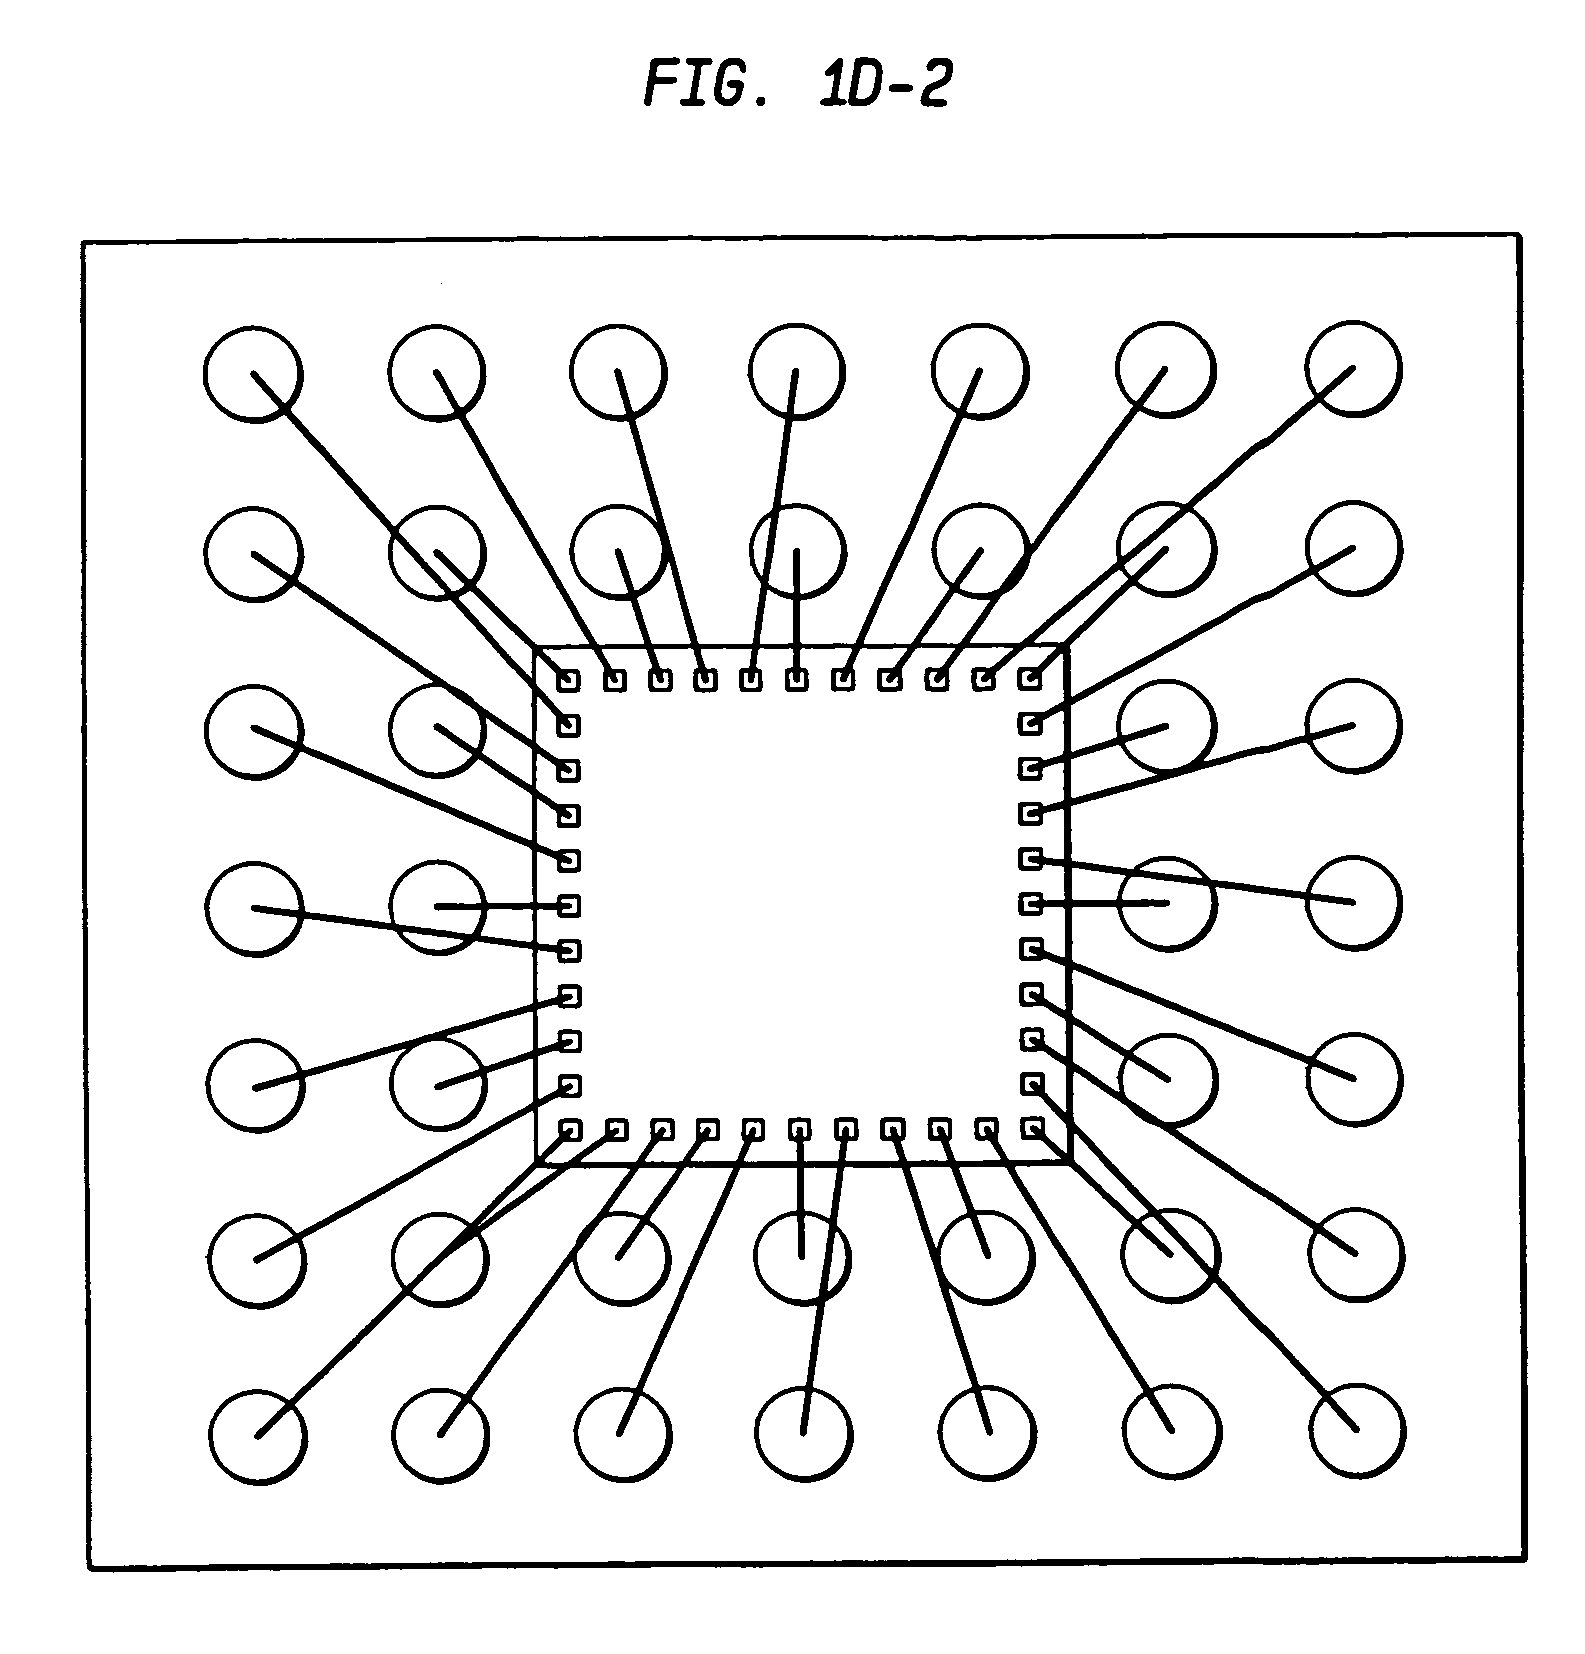 Methods for manufacturing resistors using a sacrificial layer